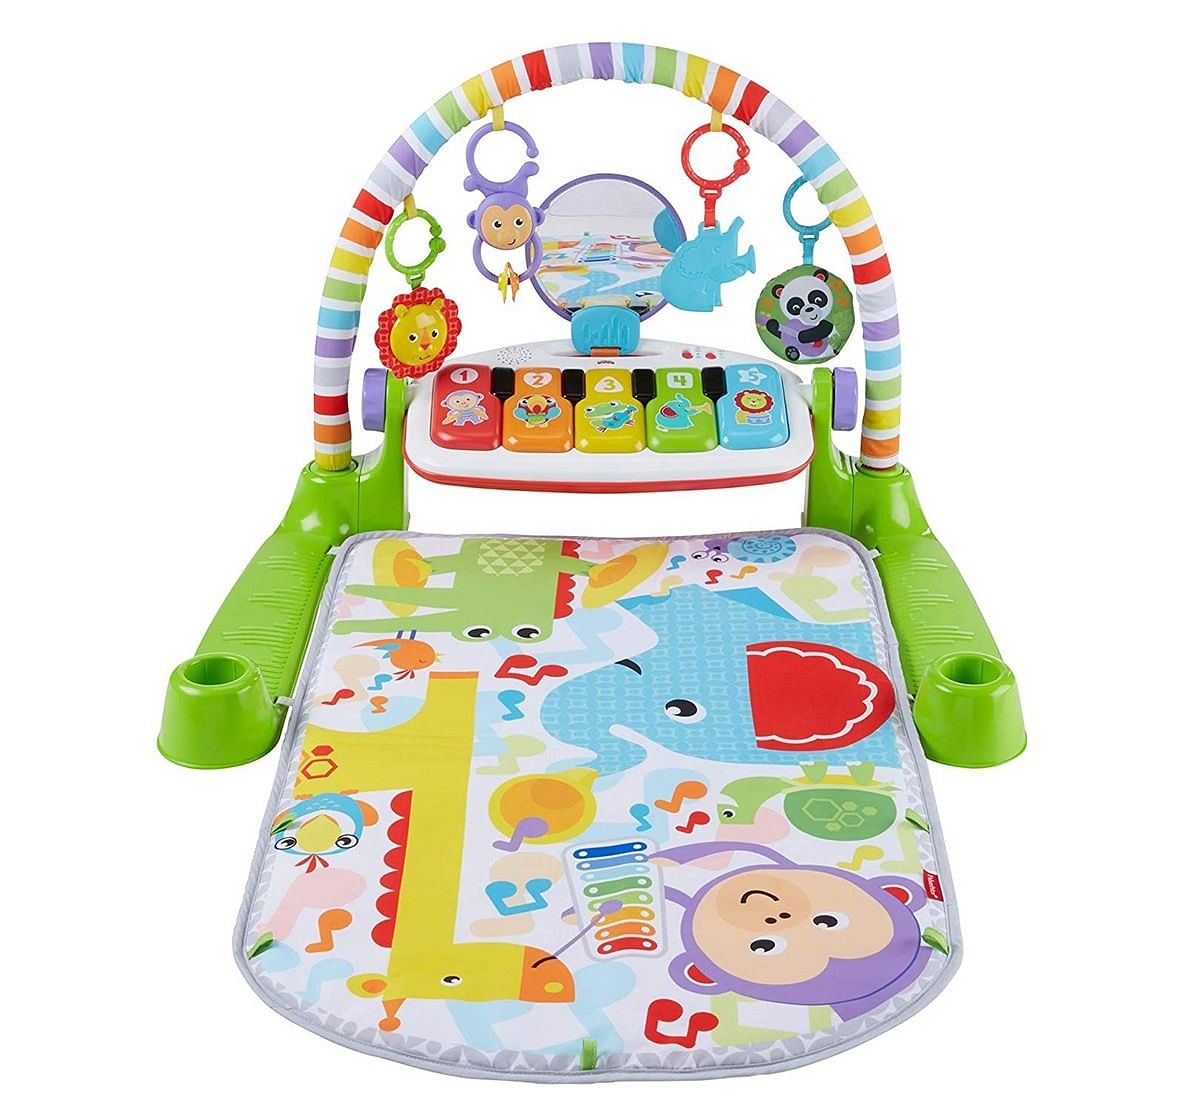 Fisher Price Deluxe Kick And Play Piano Gym Baby Gear for Kids age 6M+ 